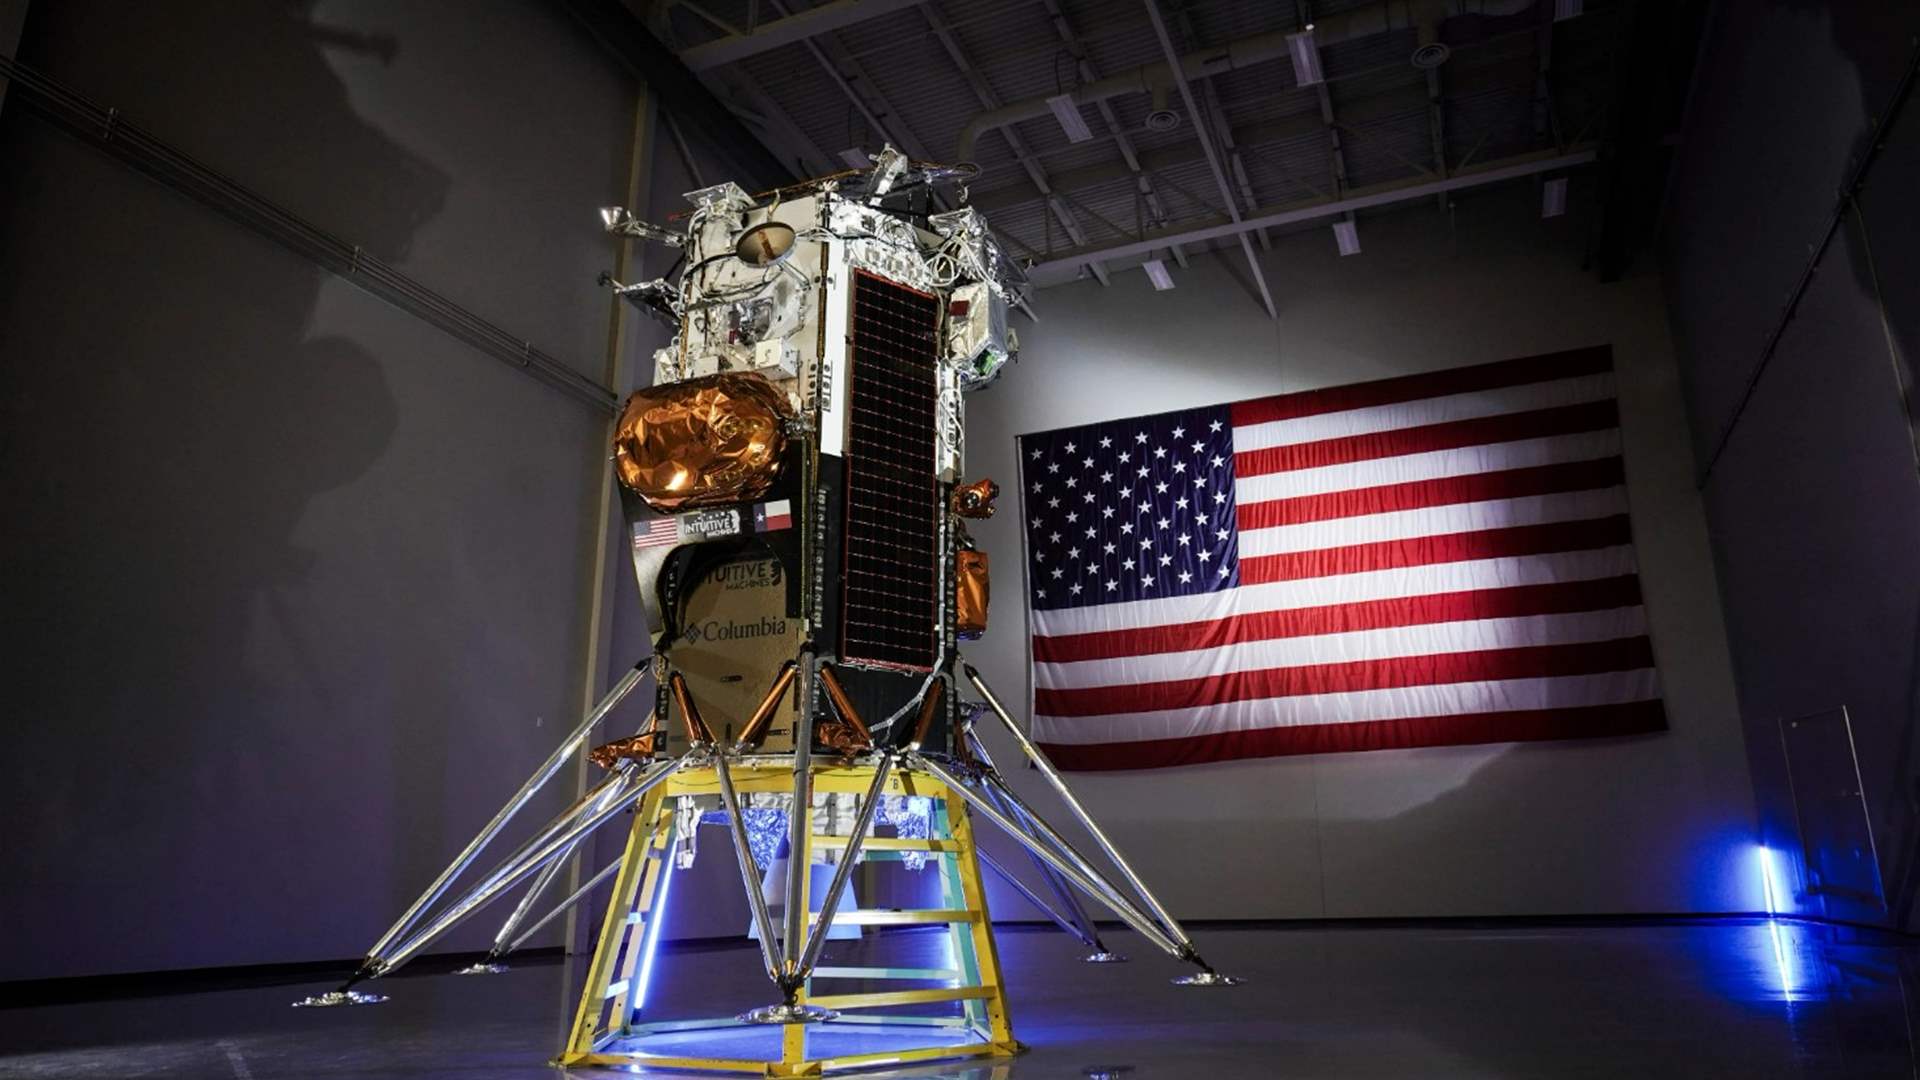 Private moon lander launched to conduct first US lunar touchdown half-century after last Apollo lunar mission